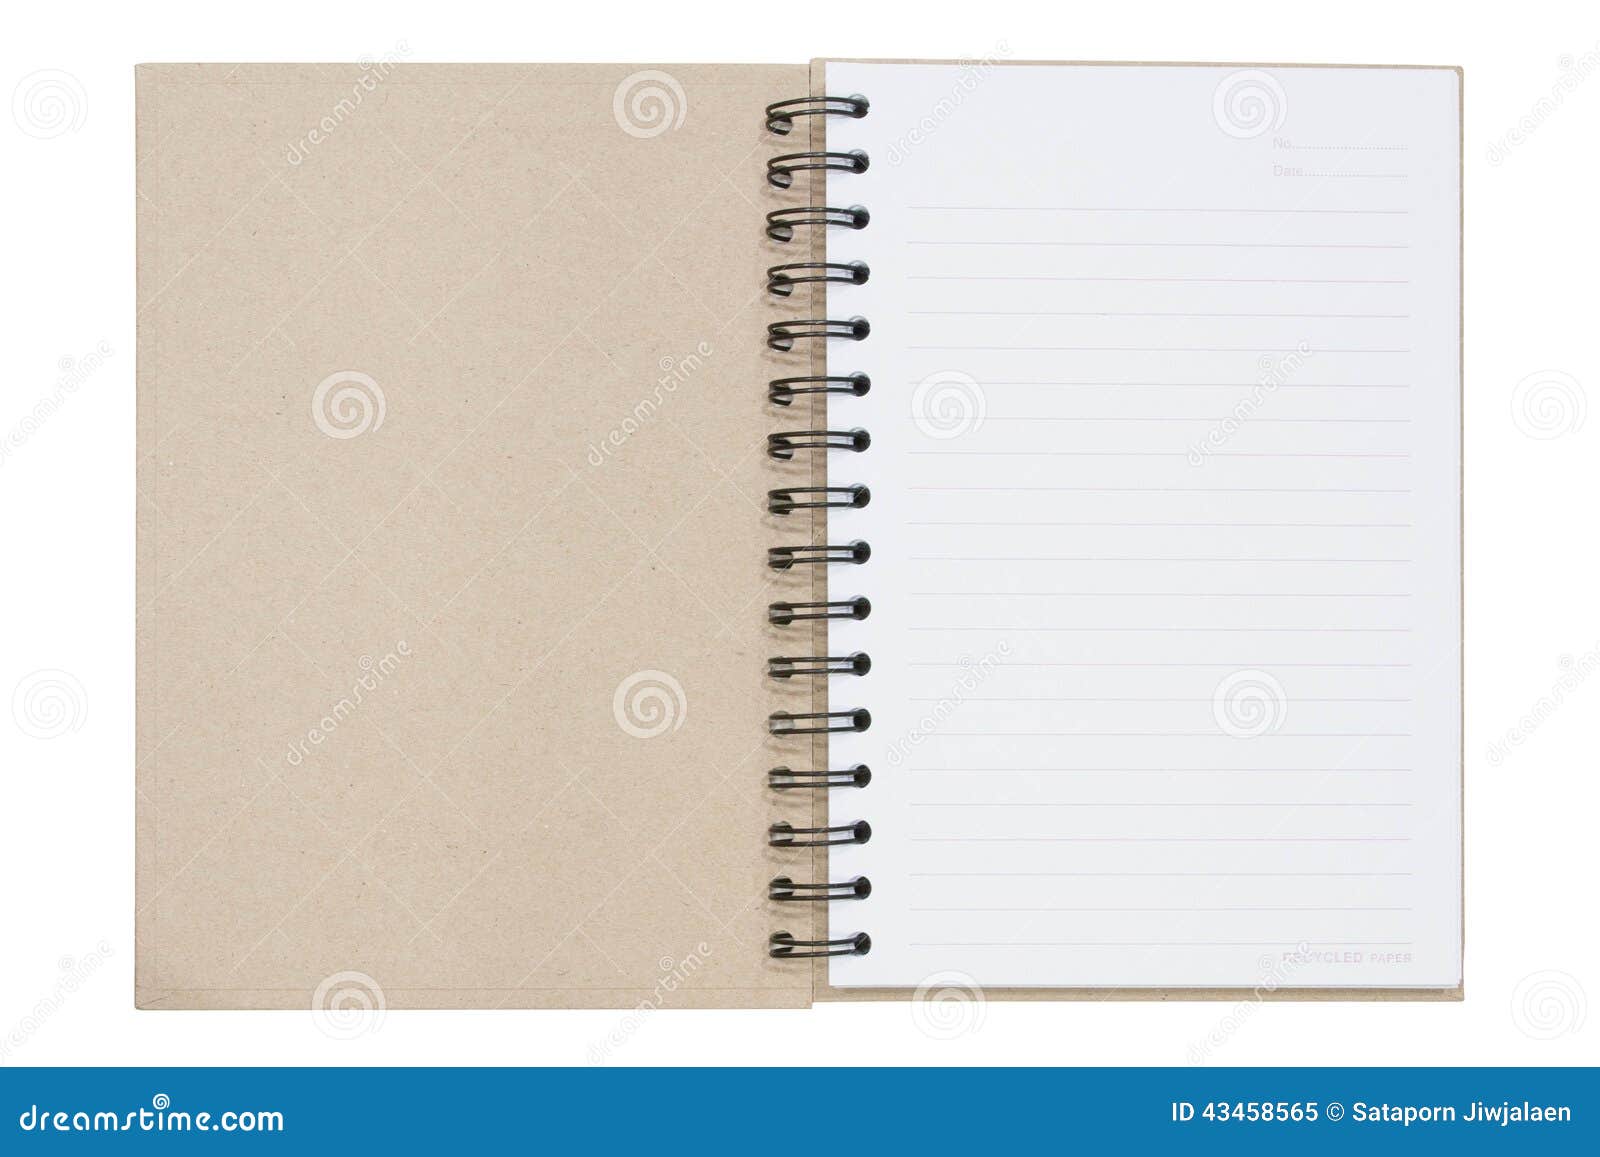 Blank Notebook Page Vector Images (over 42,000)